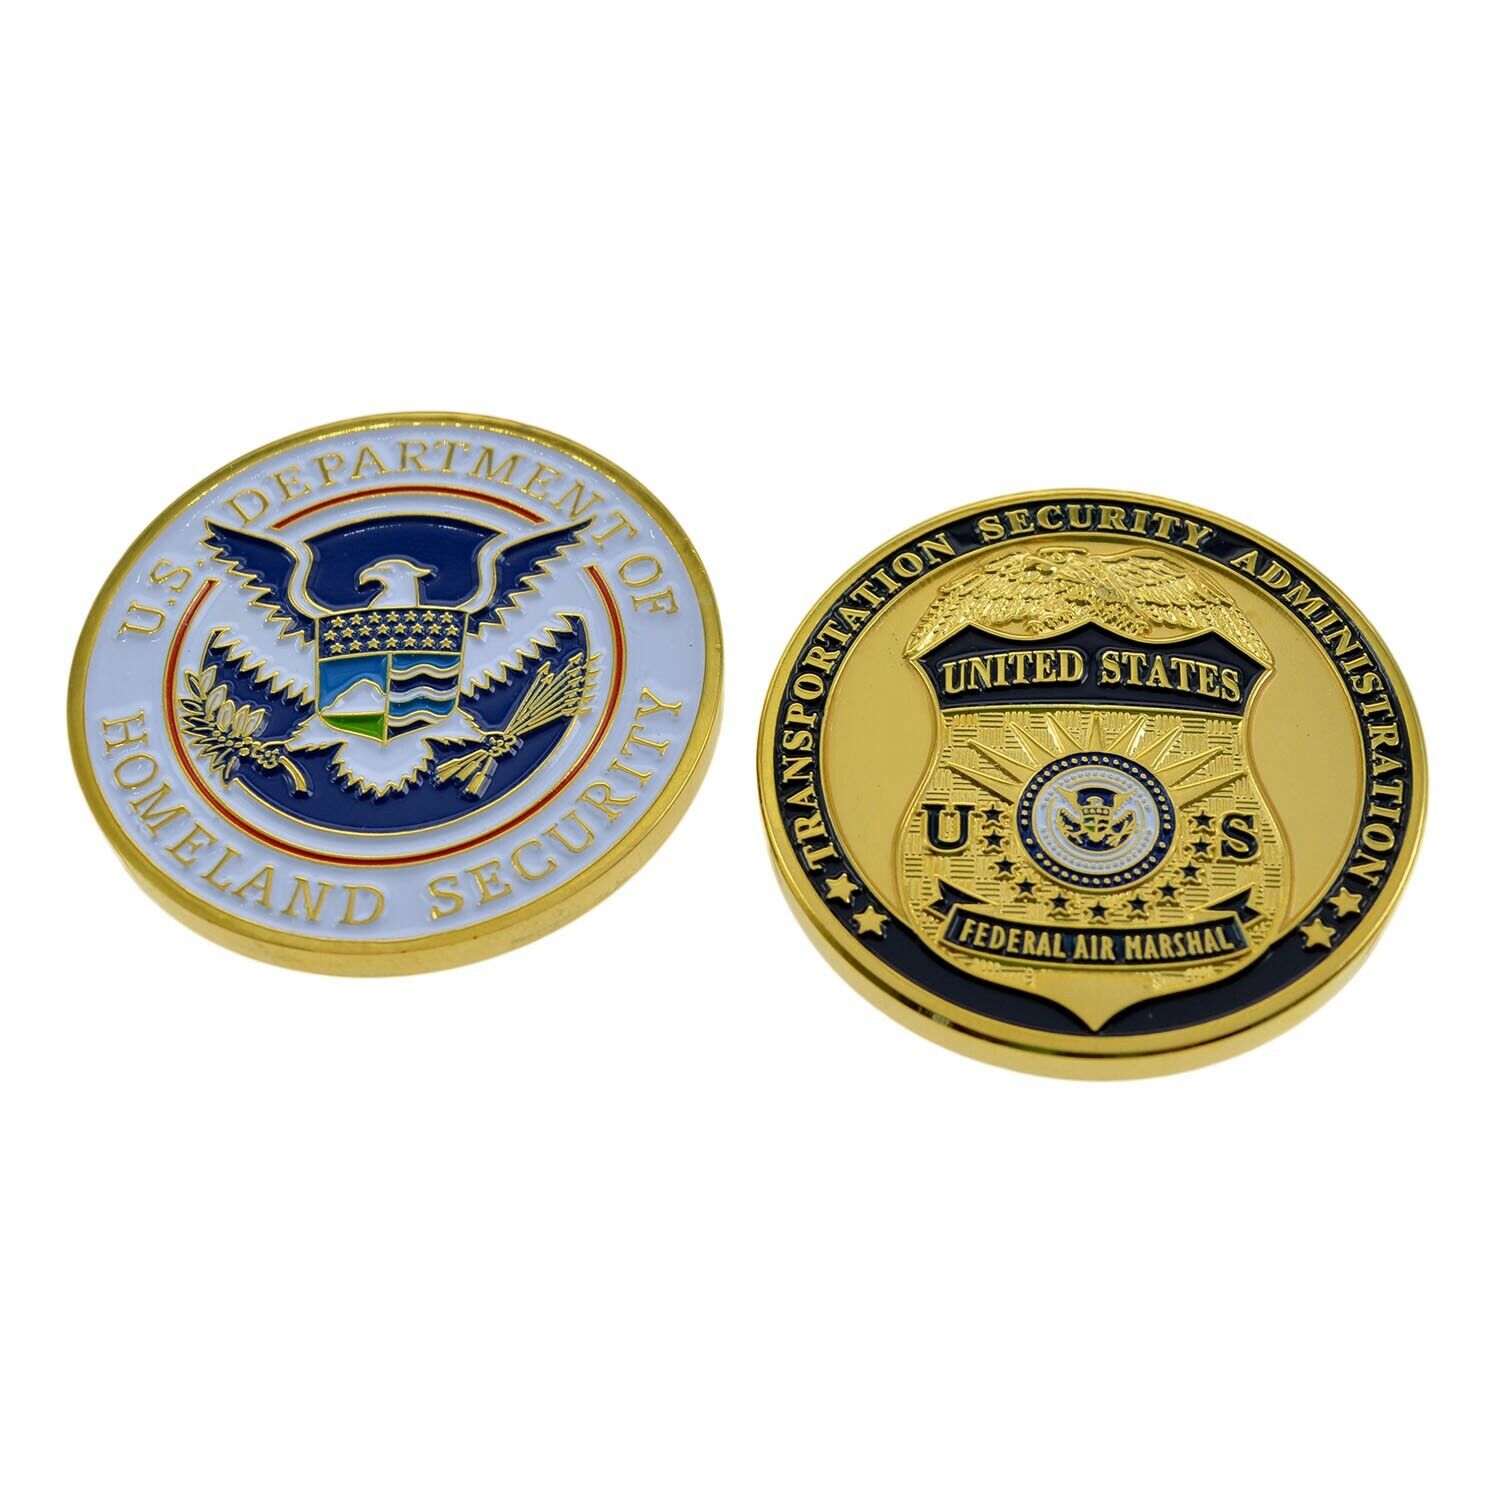 Federal Air Marshal FAMS Challenge Coin Gold Plate with Coin Capsule